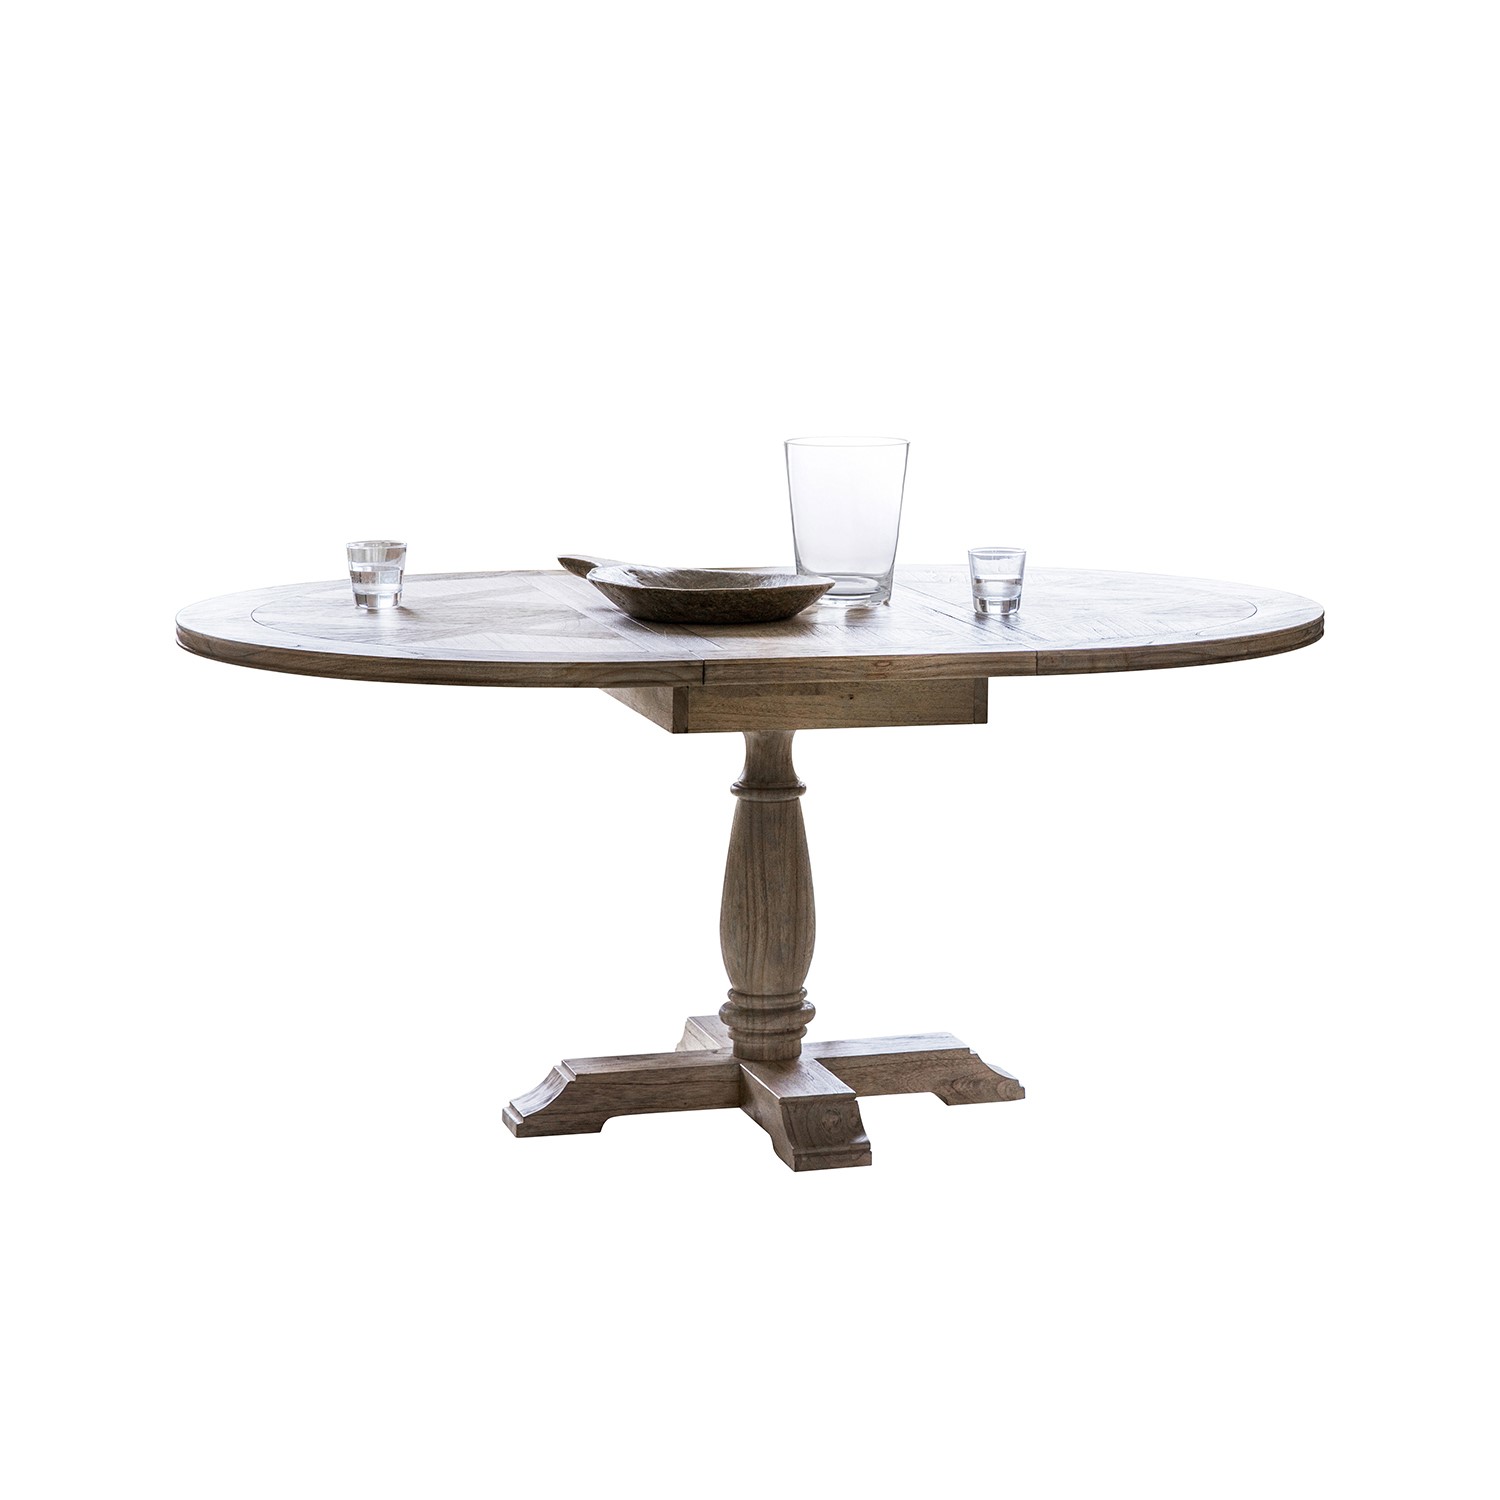 Photo of Round extendable dining table - seats 4-6 - caspian house